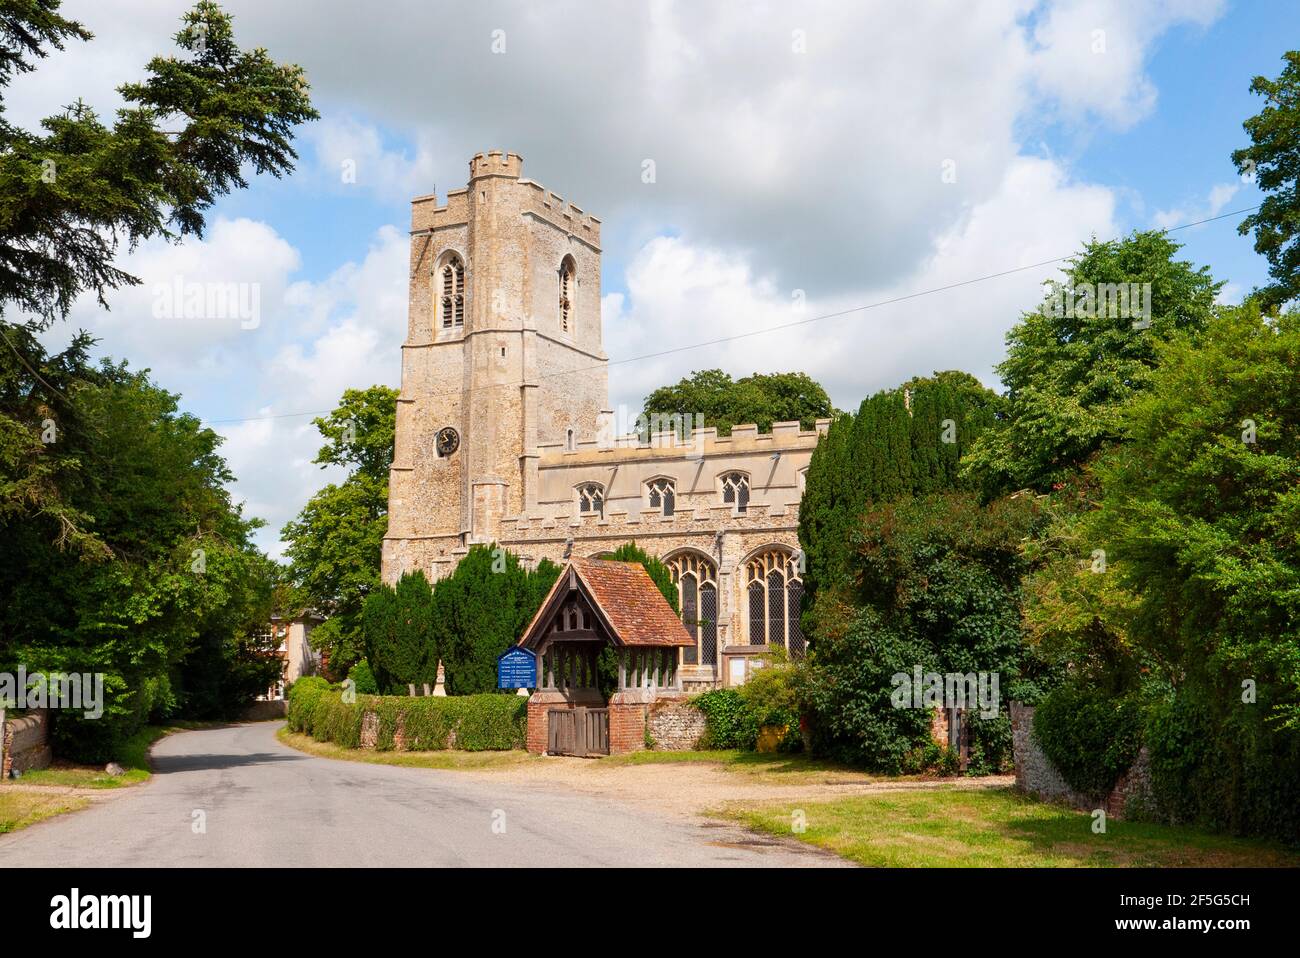 St Lawrence church and lych gate in the village of Great Waldingfield, Suffolk, England Stock Photo